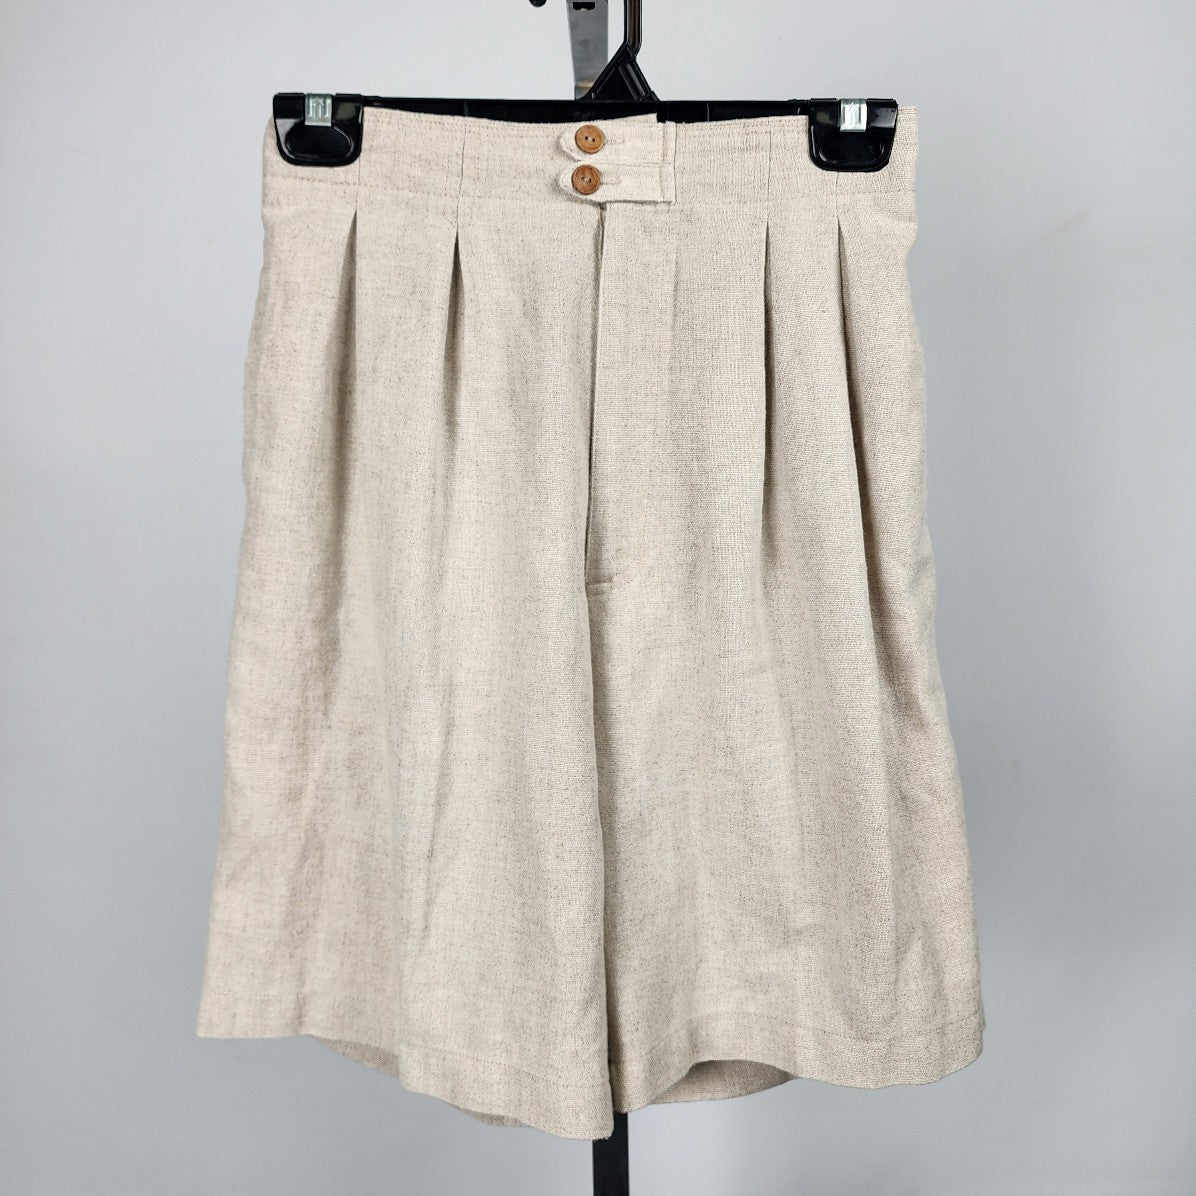 Vintage Mac & Jac Taupe Linen Blend High Waisted Shorts Size S